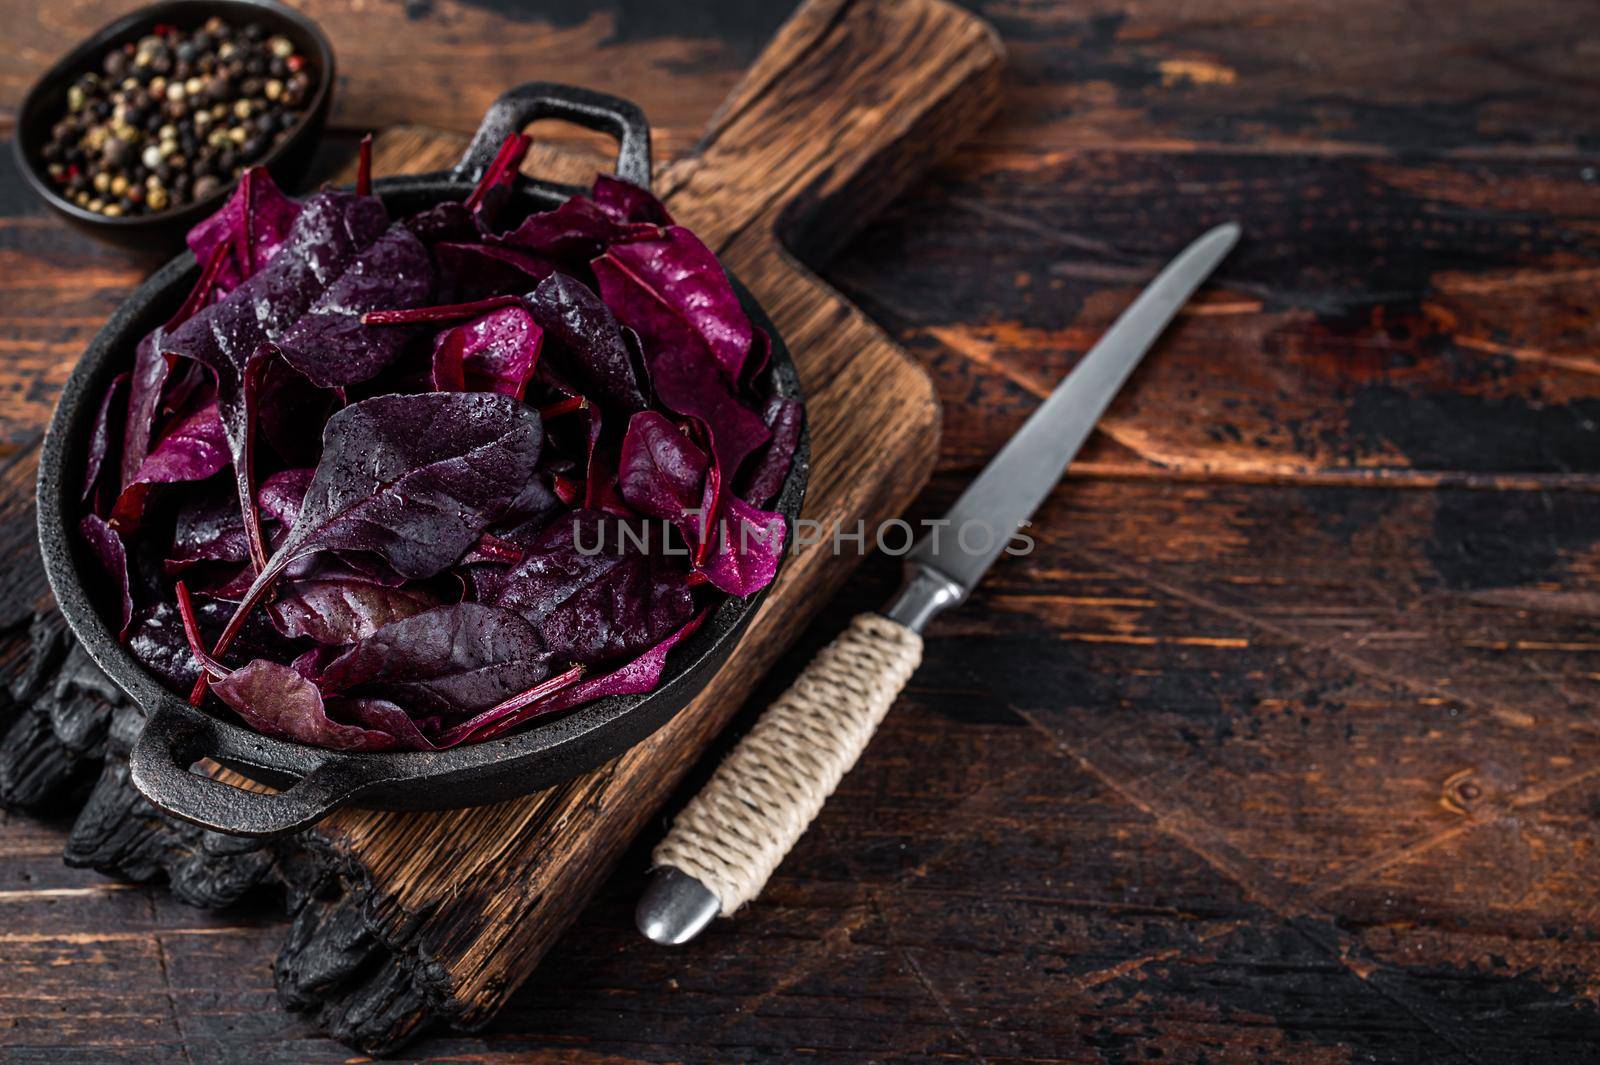 Swiss red chard or Mangold salad Leafs in a pan. Dark wooden background. Top view. Copy space by Composter